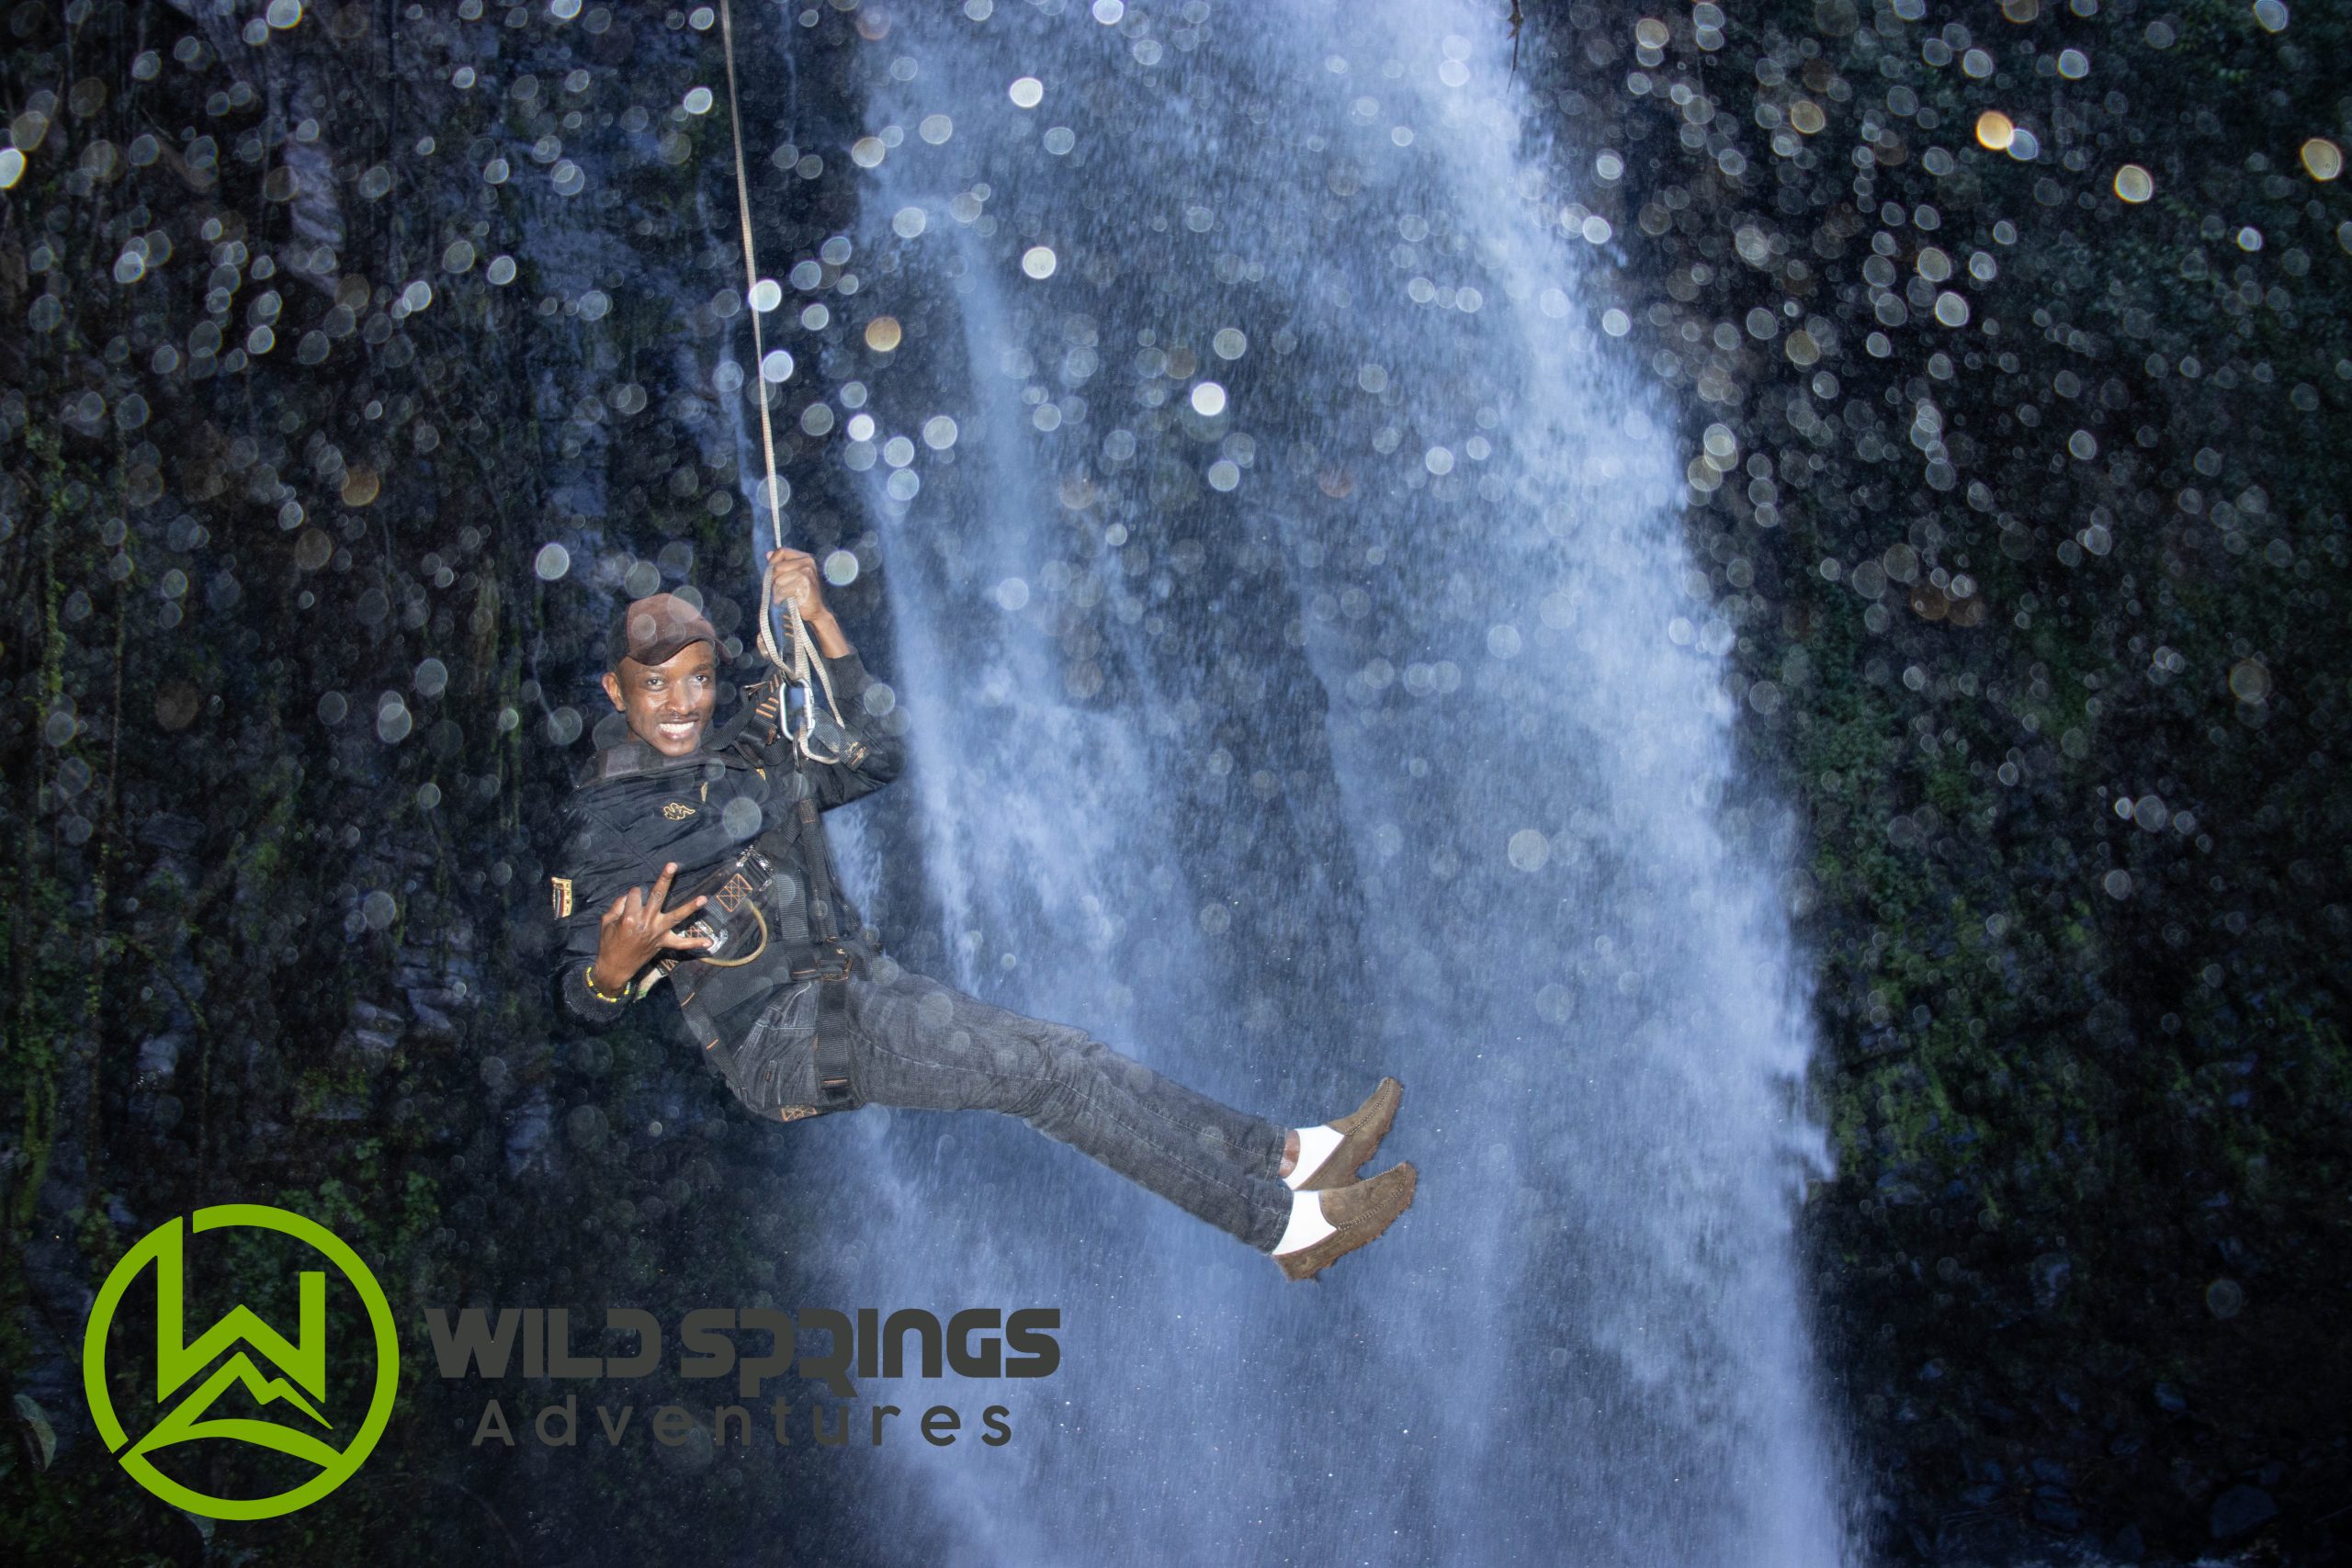 Wild swing charges in njine kabia falls